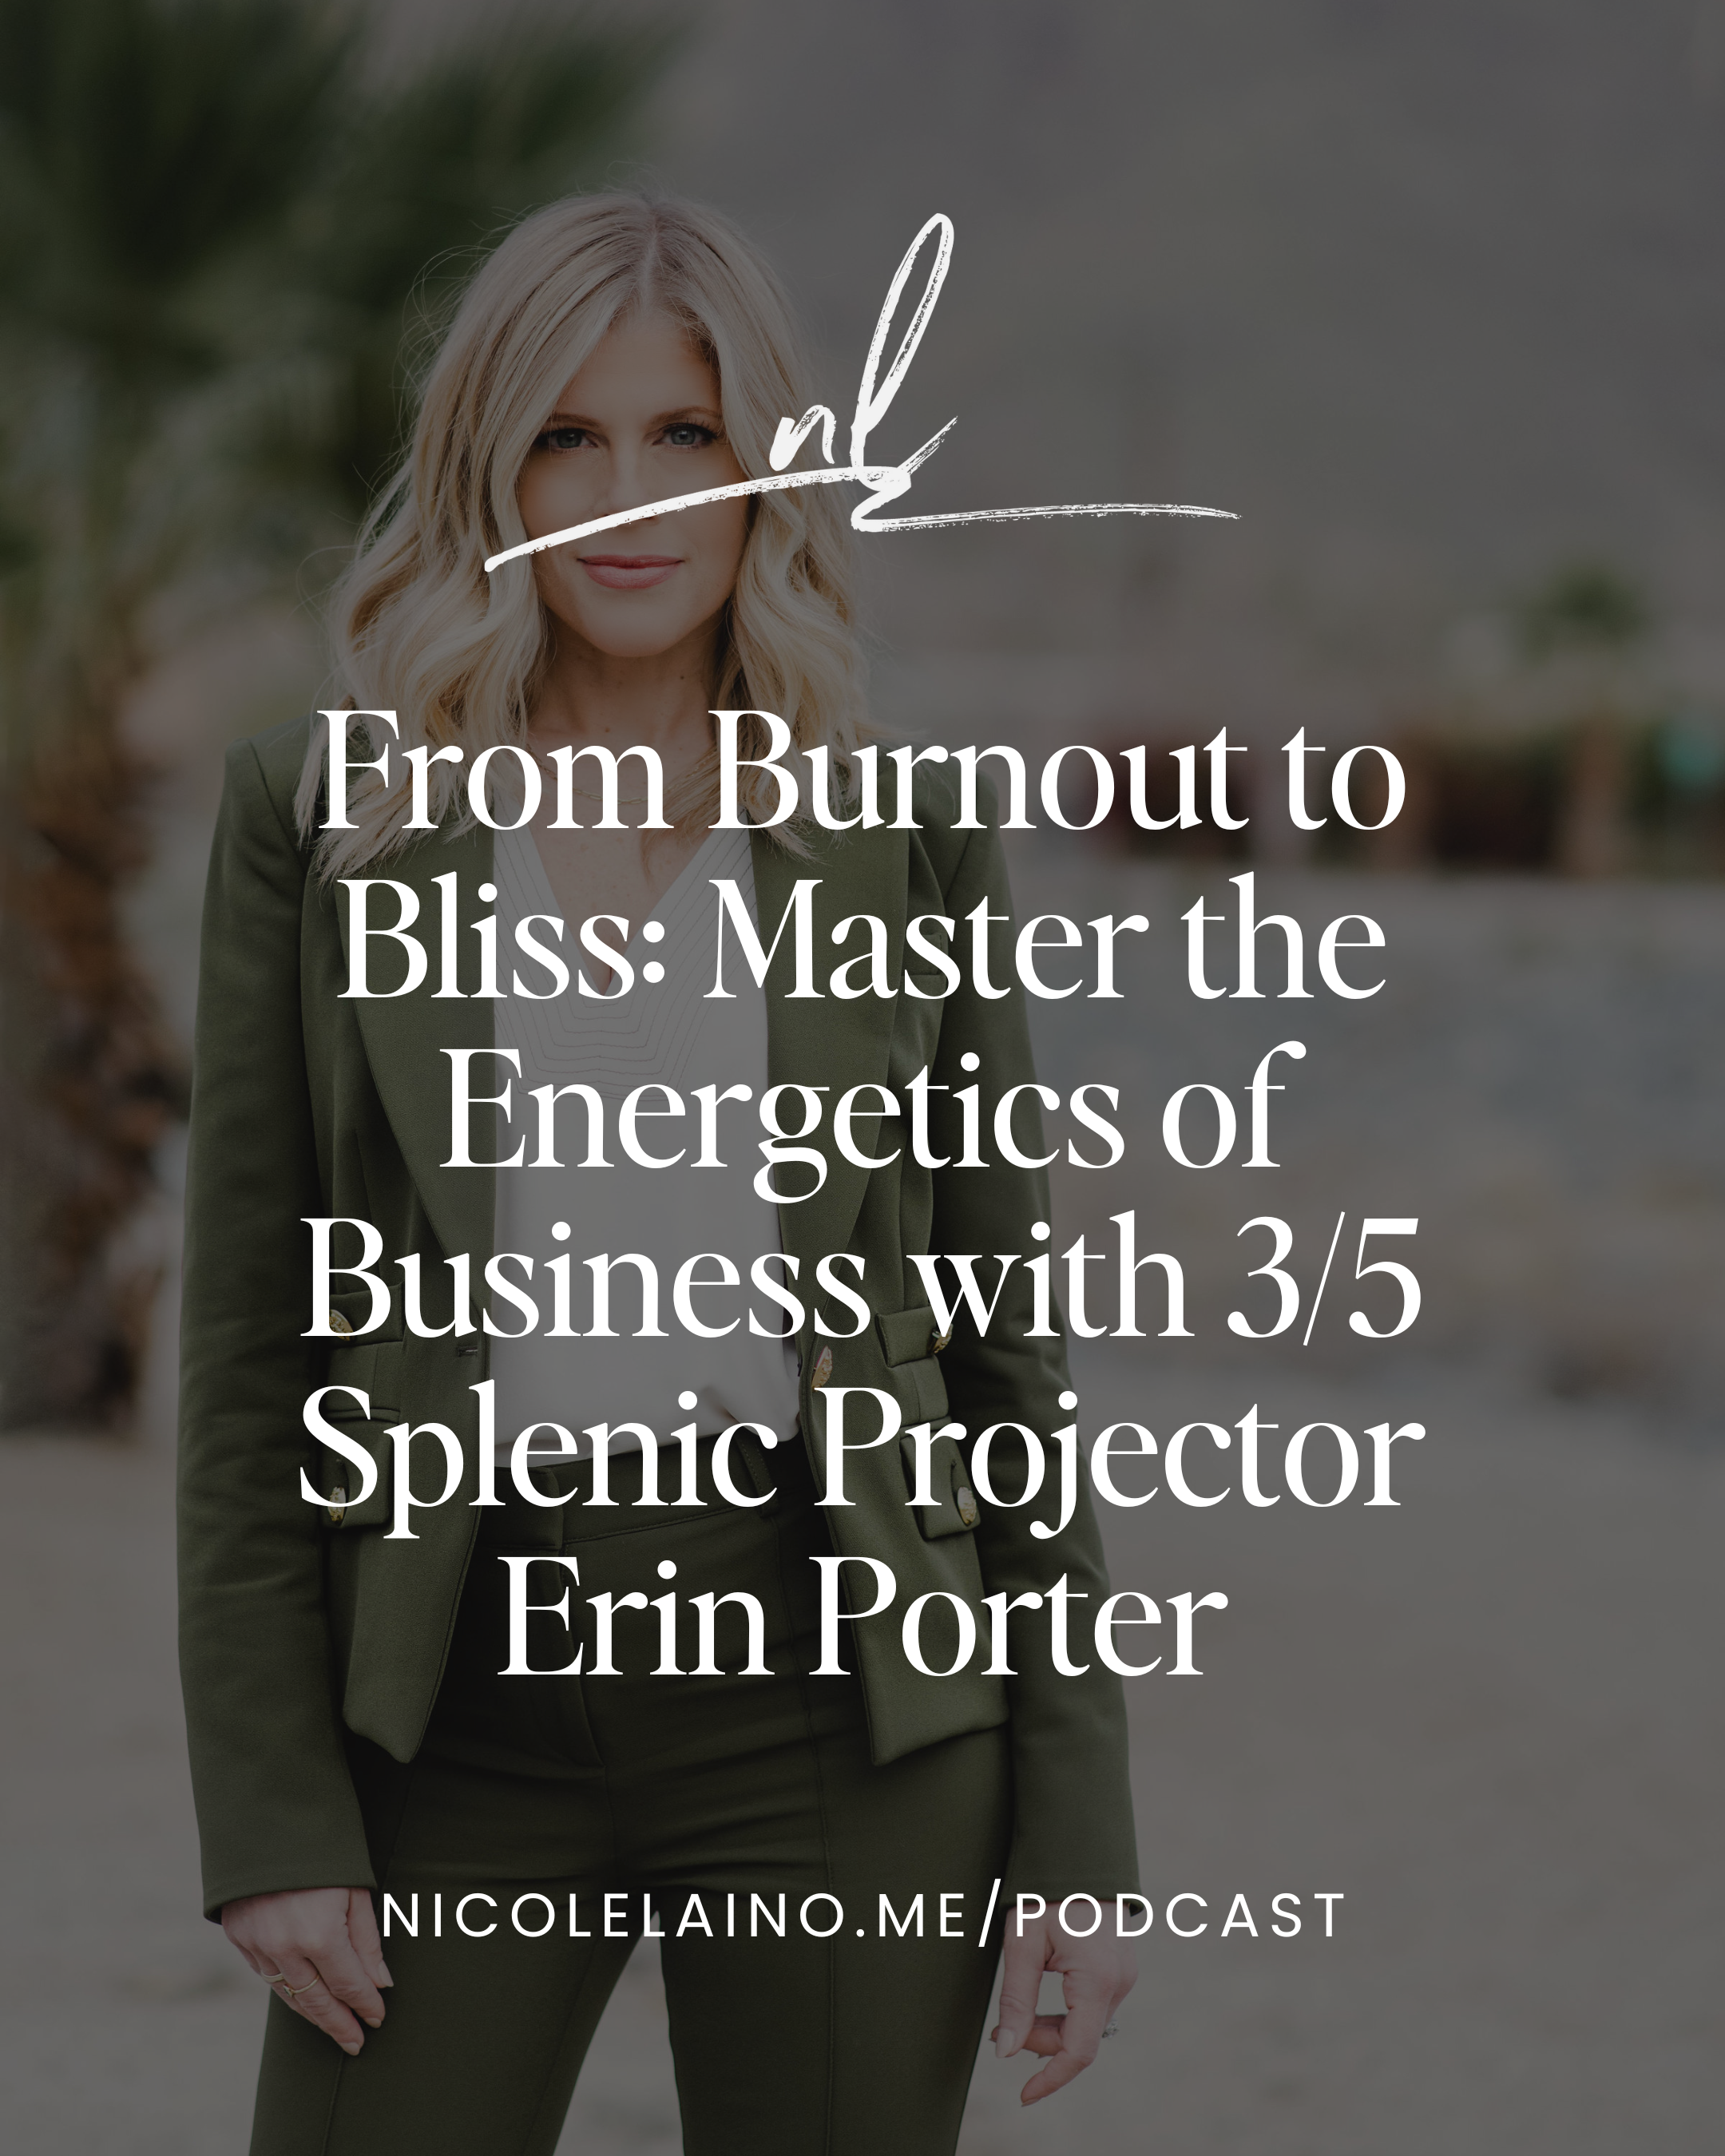 From Burnout to Bliss: Master the Energetics of Business with 3/5 Splenic Projector Erin Porter